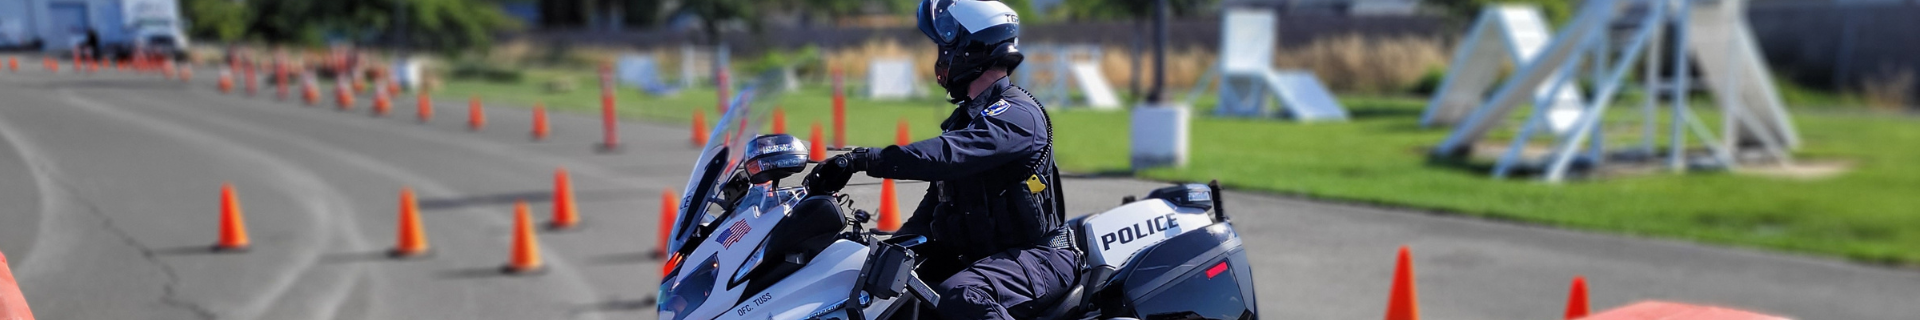 image of motorcycle officer